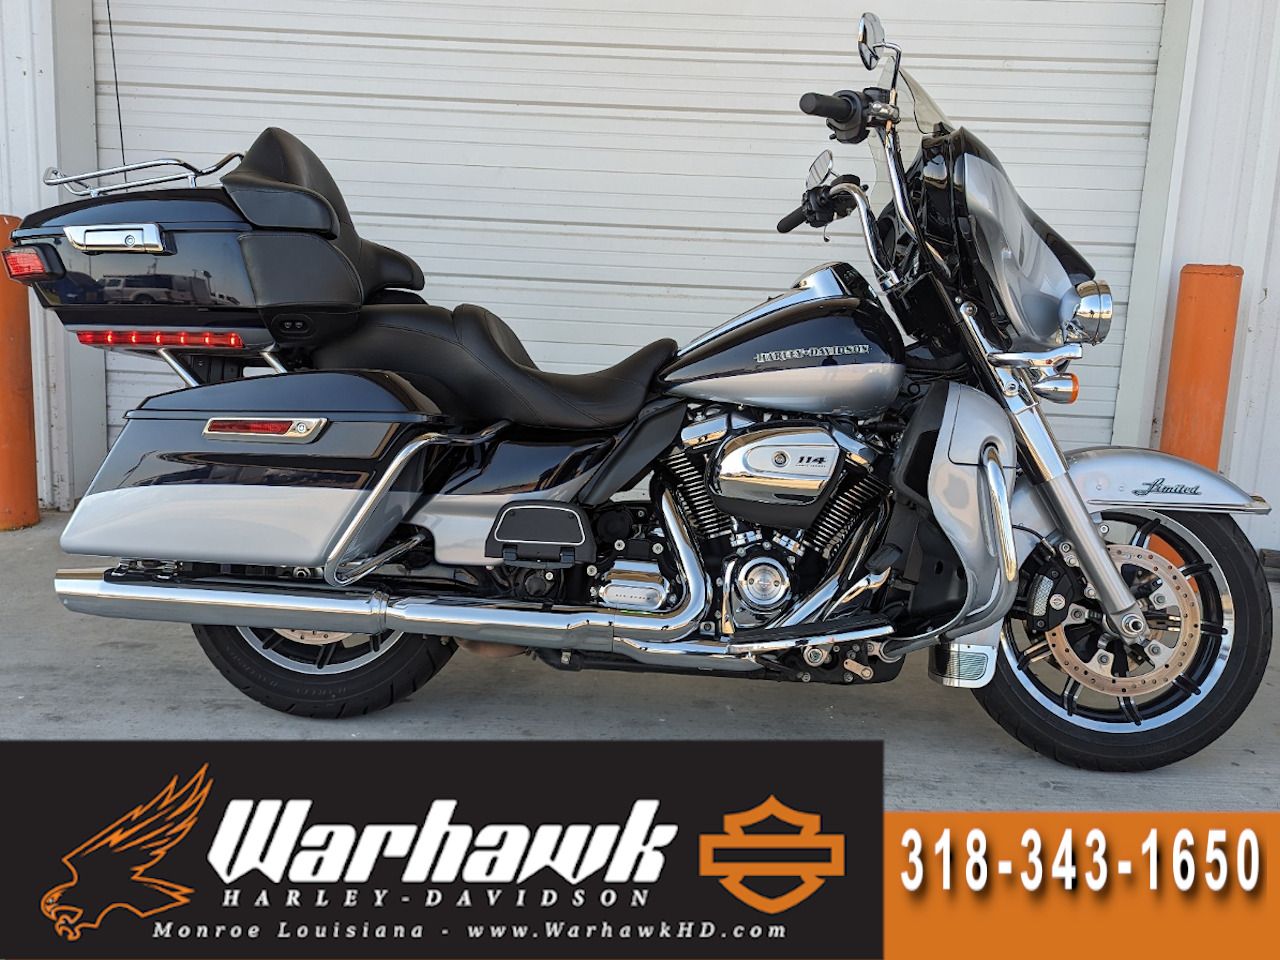 2019 harley davidson electra glide ultra limited for sale near me - Photo 1